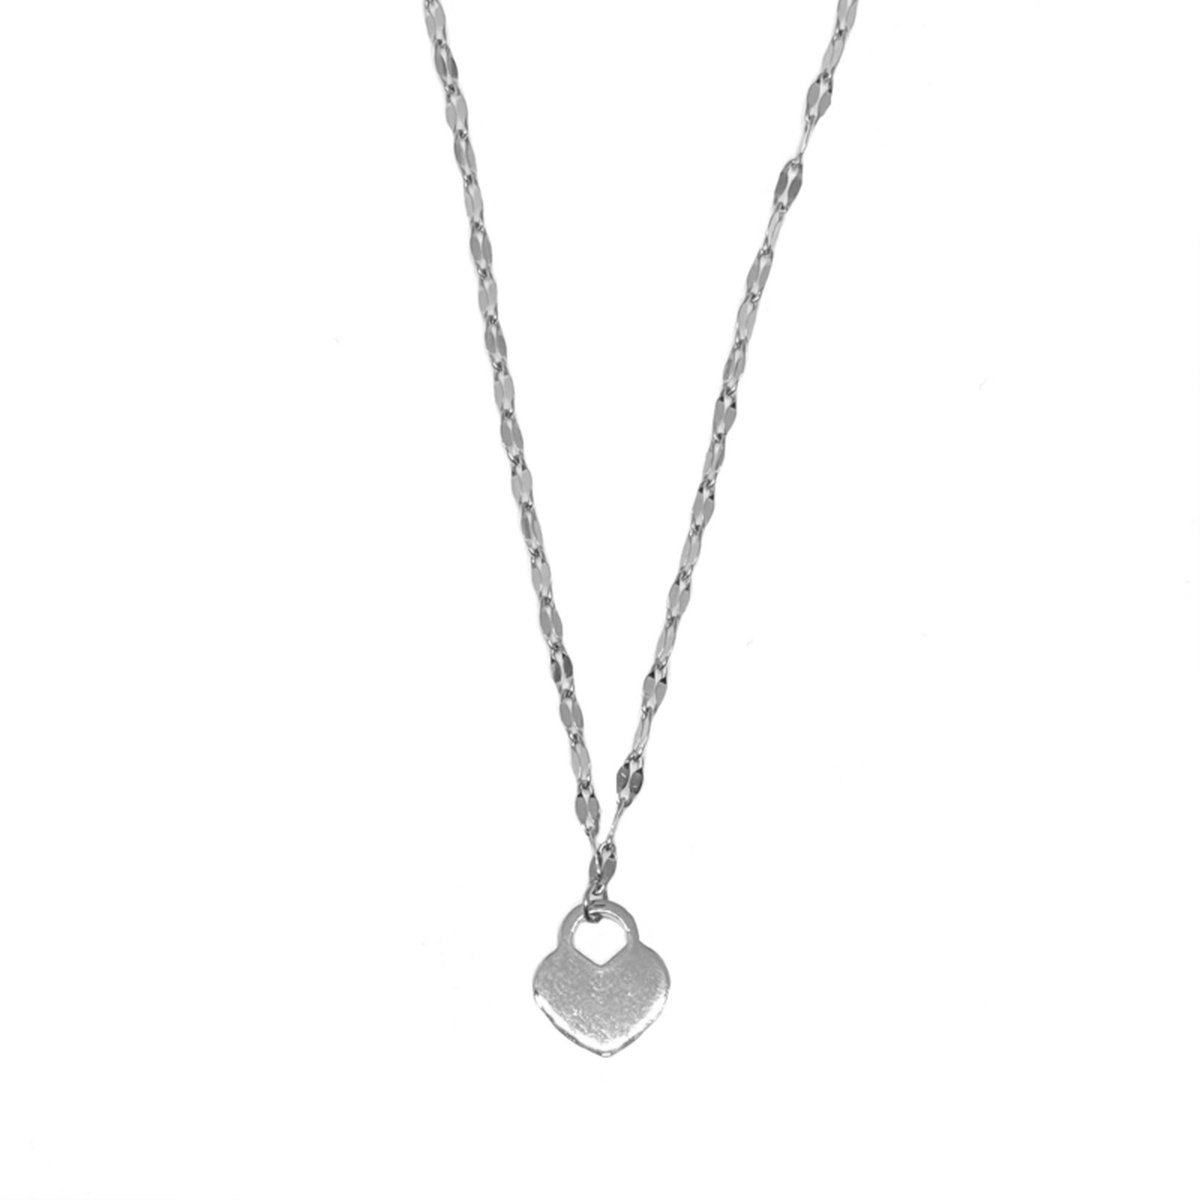 Life is good necklace - silver